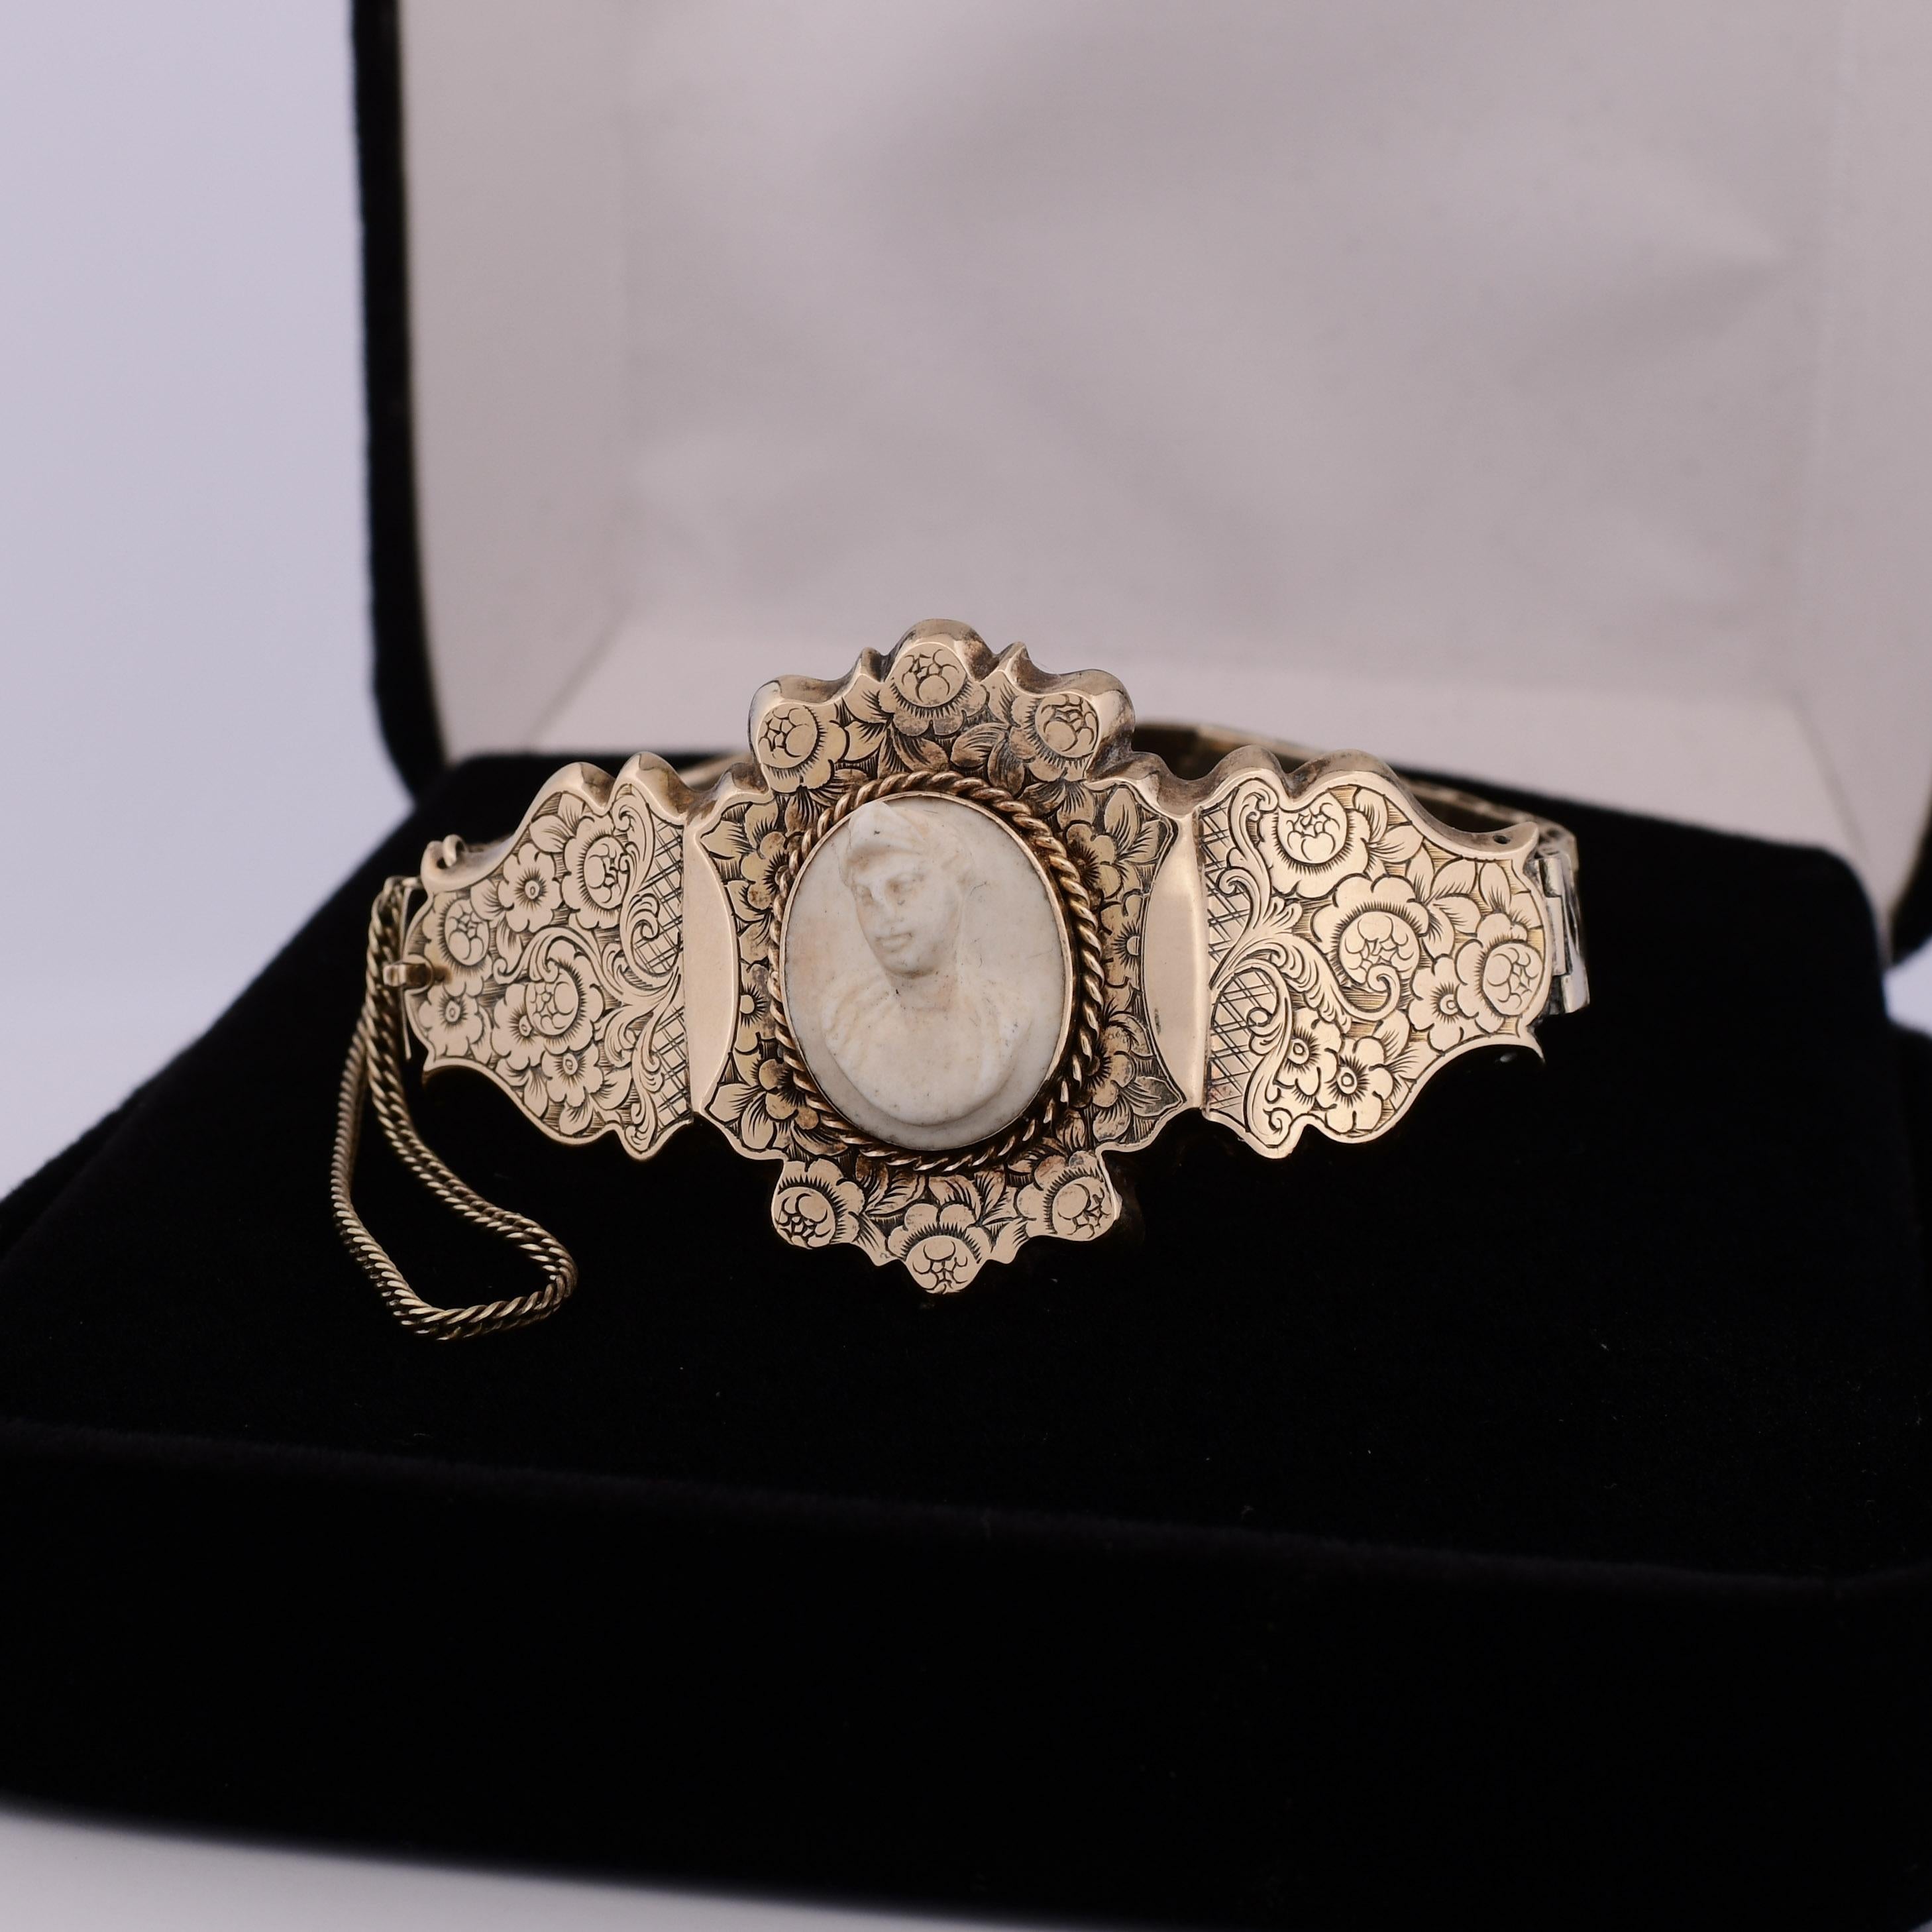 Women's Antique Victorian Cameo Bracelet with Ornate Floral Engraving 14K Gold